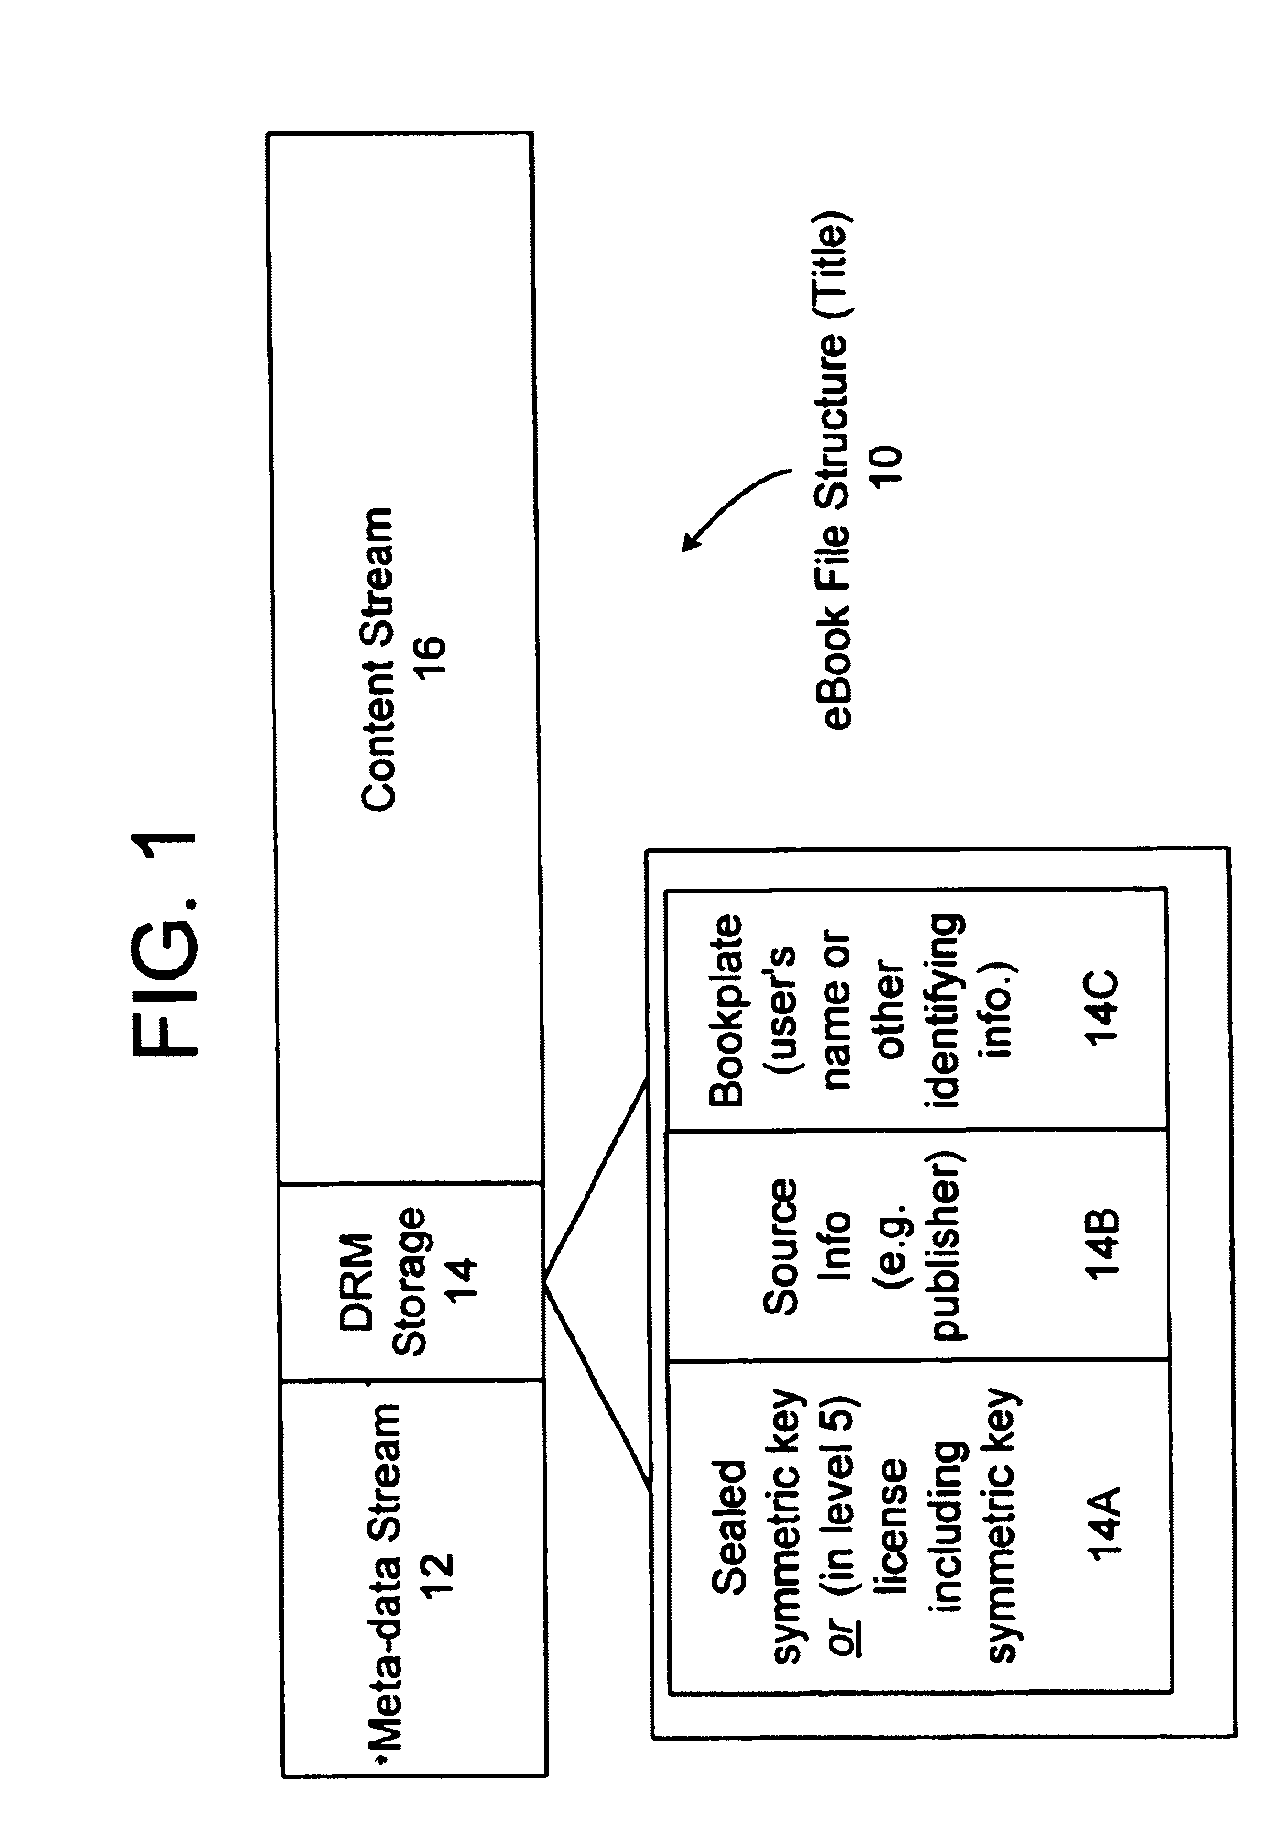 Server for an electronic distribution system and method of operating same